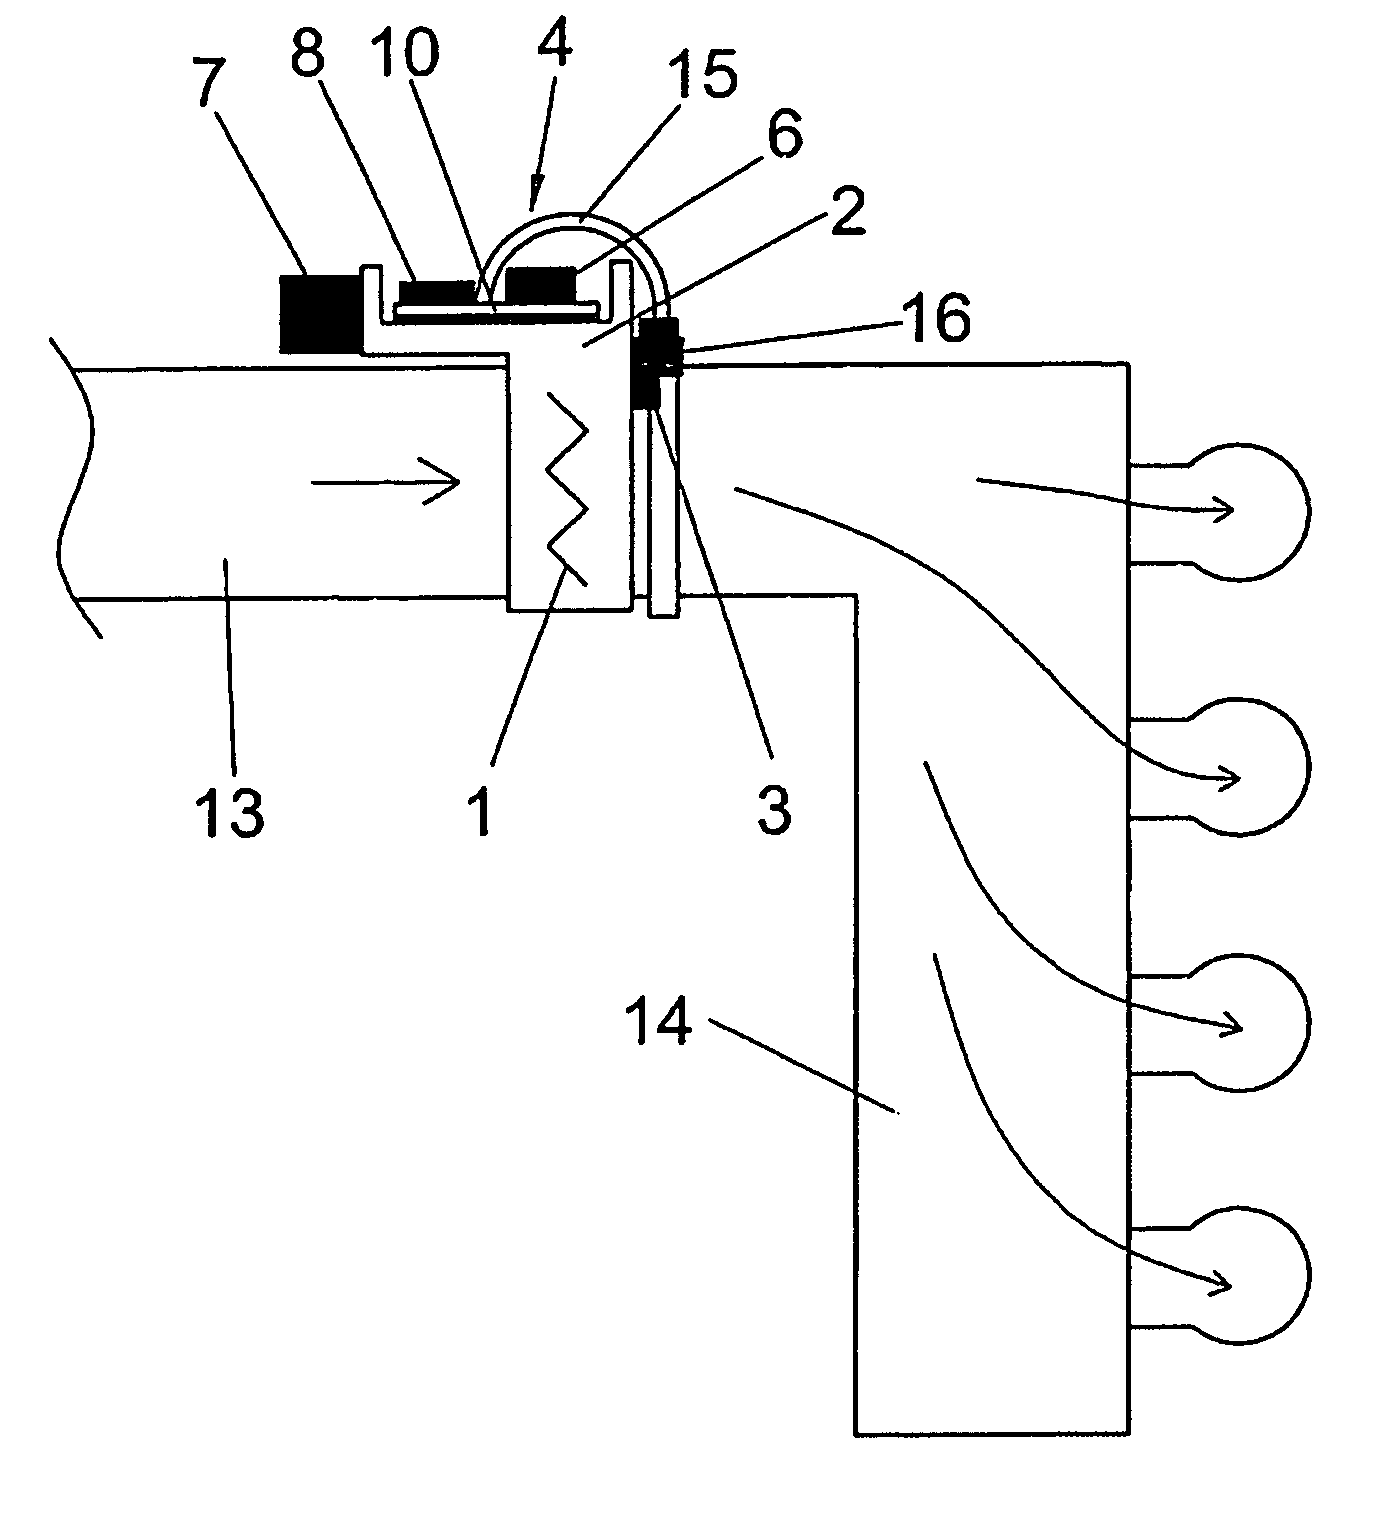 Module for heating the intake gases of an internal combustion engine incorporating electronic temperature control